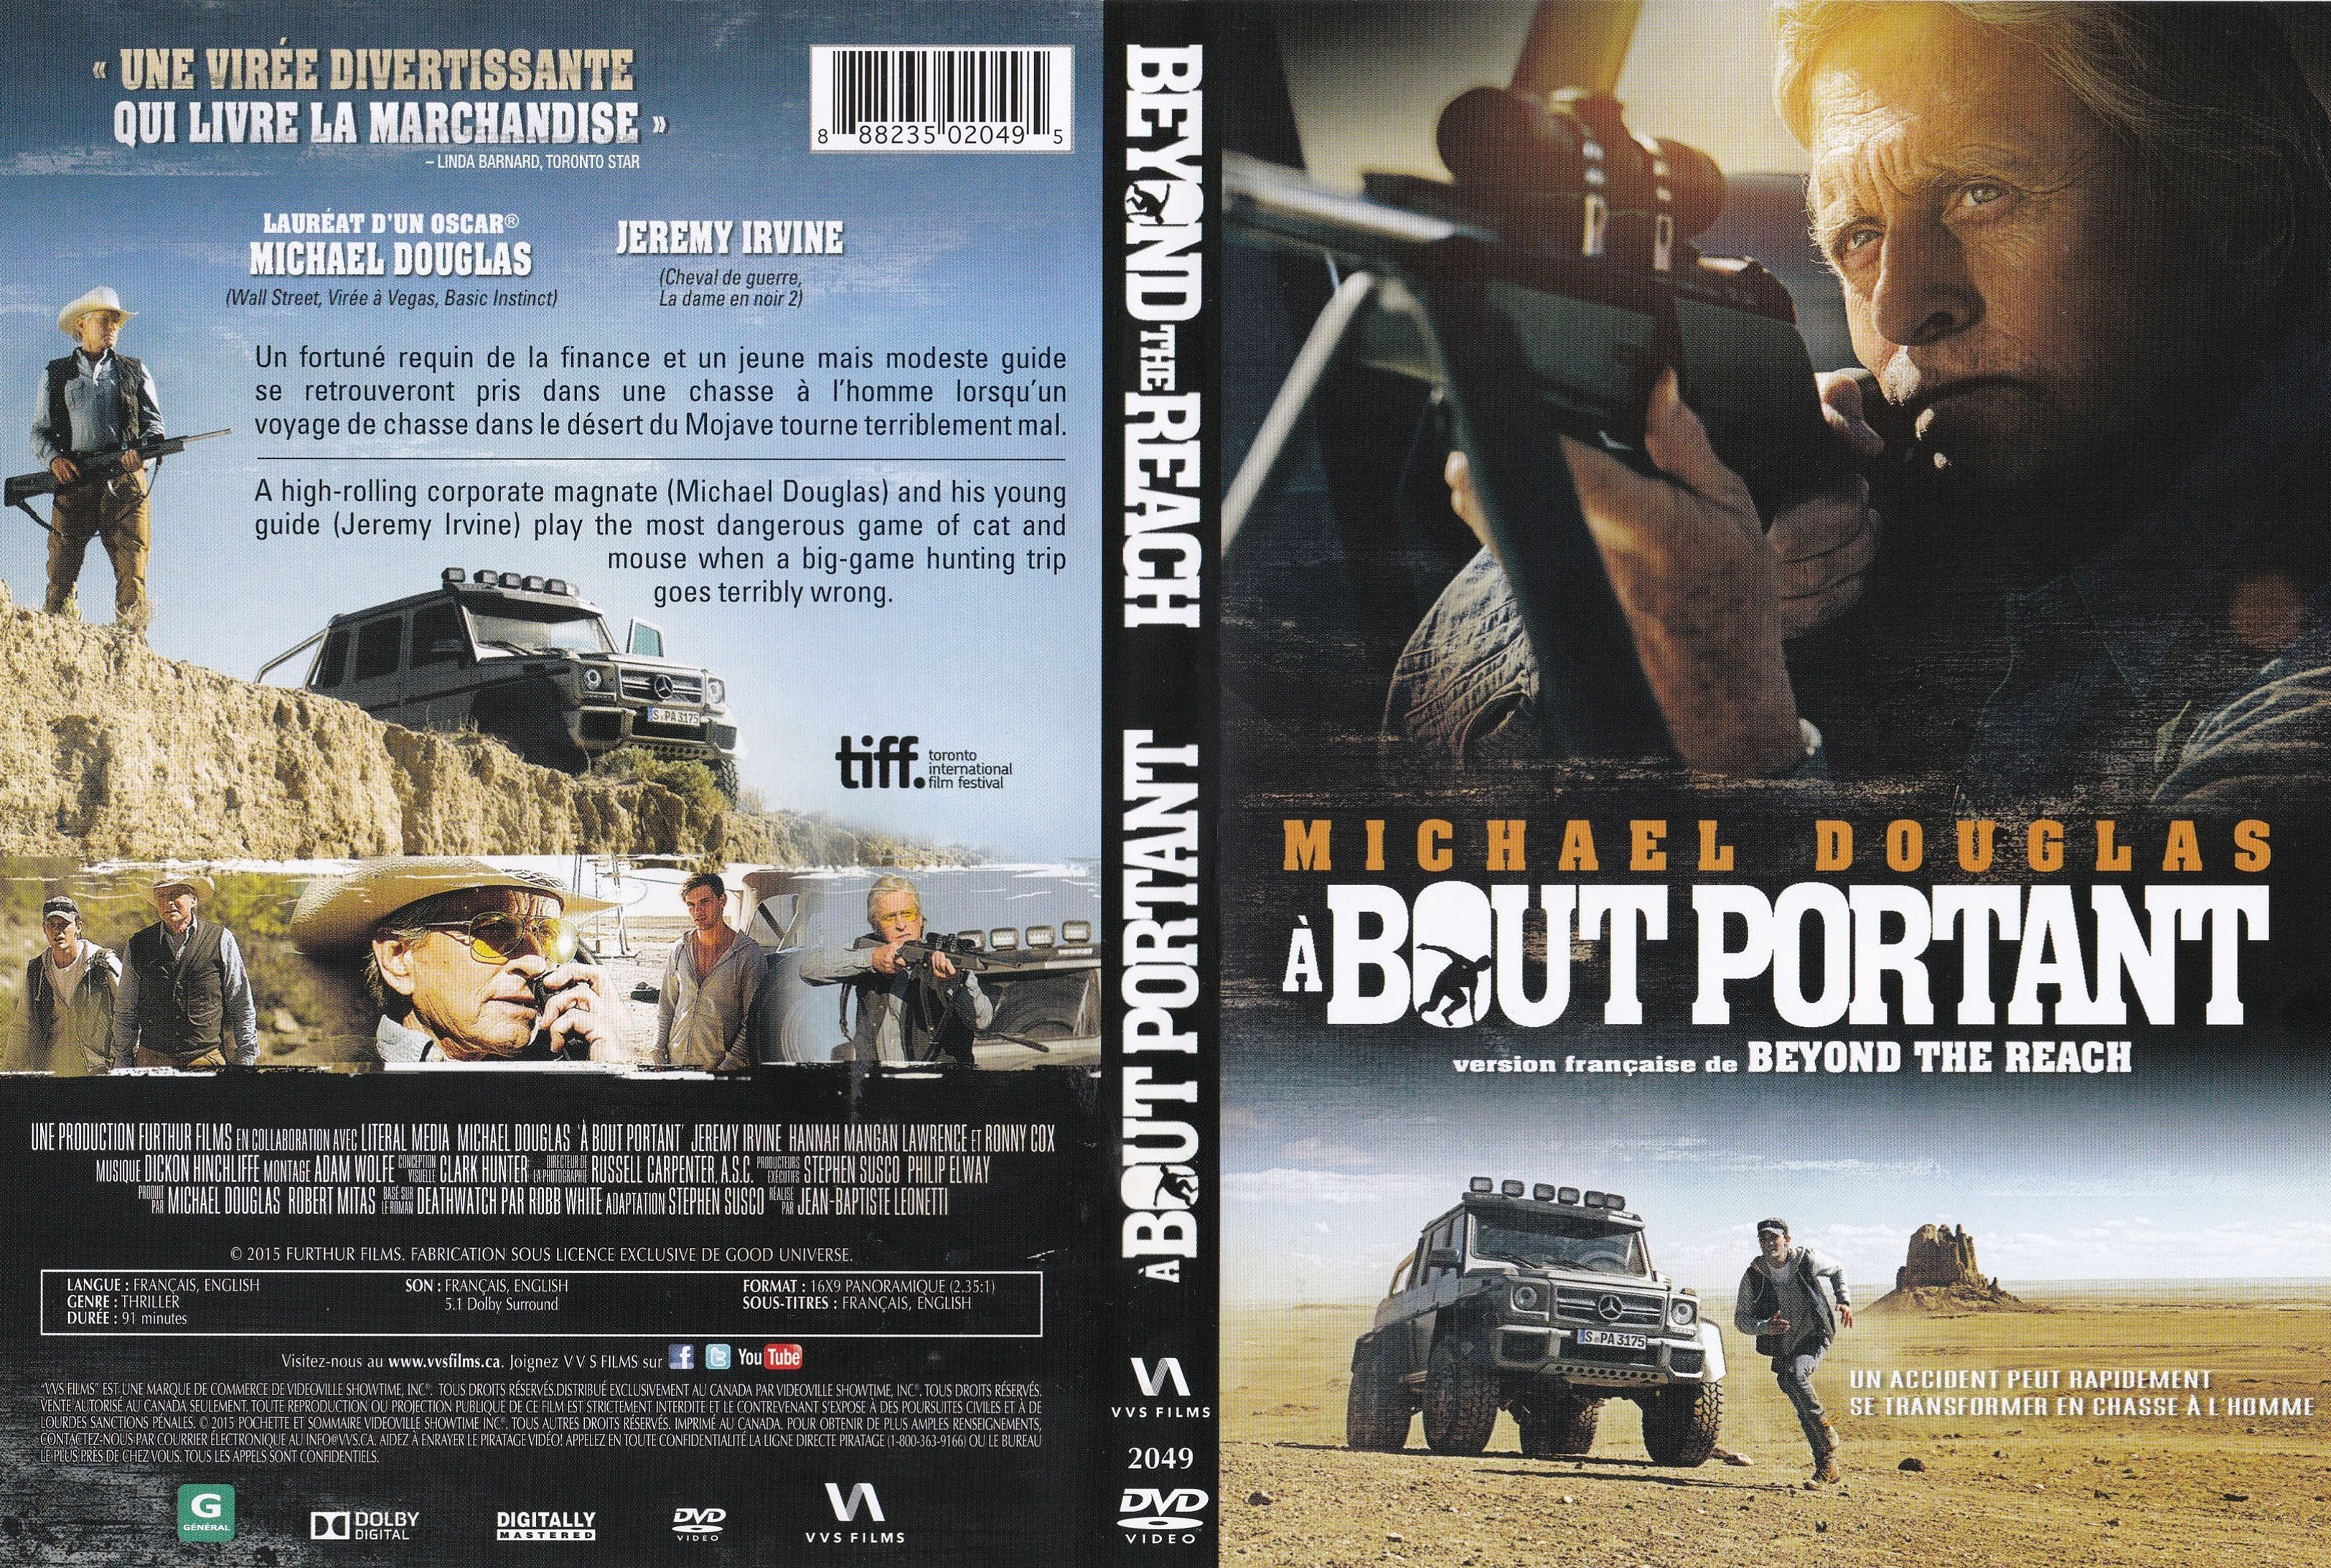 Jaquette DVD A bout portant - Beyond the reach (Canadienne)